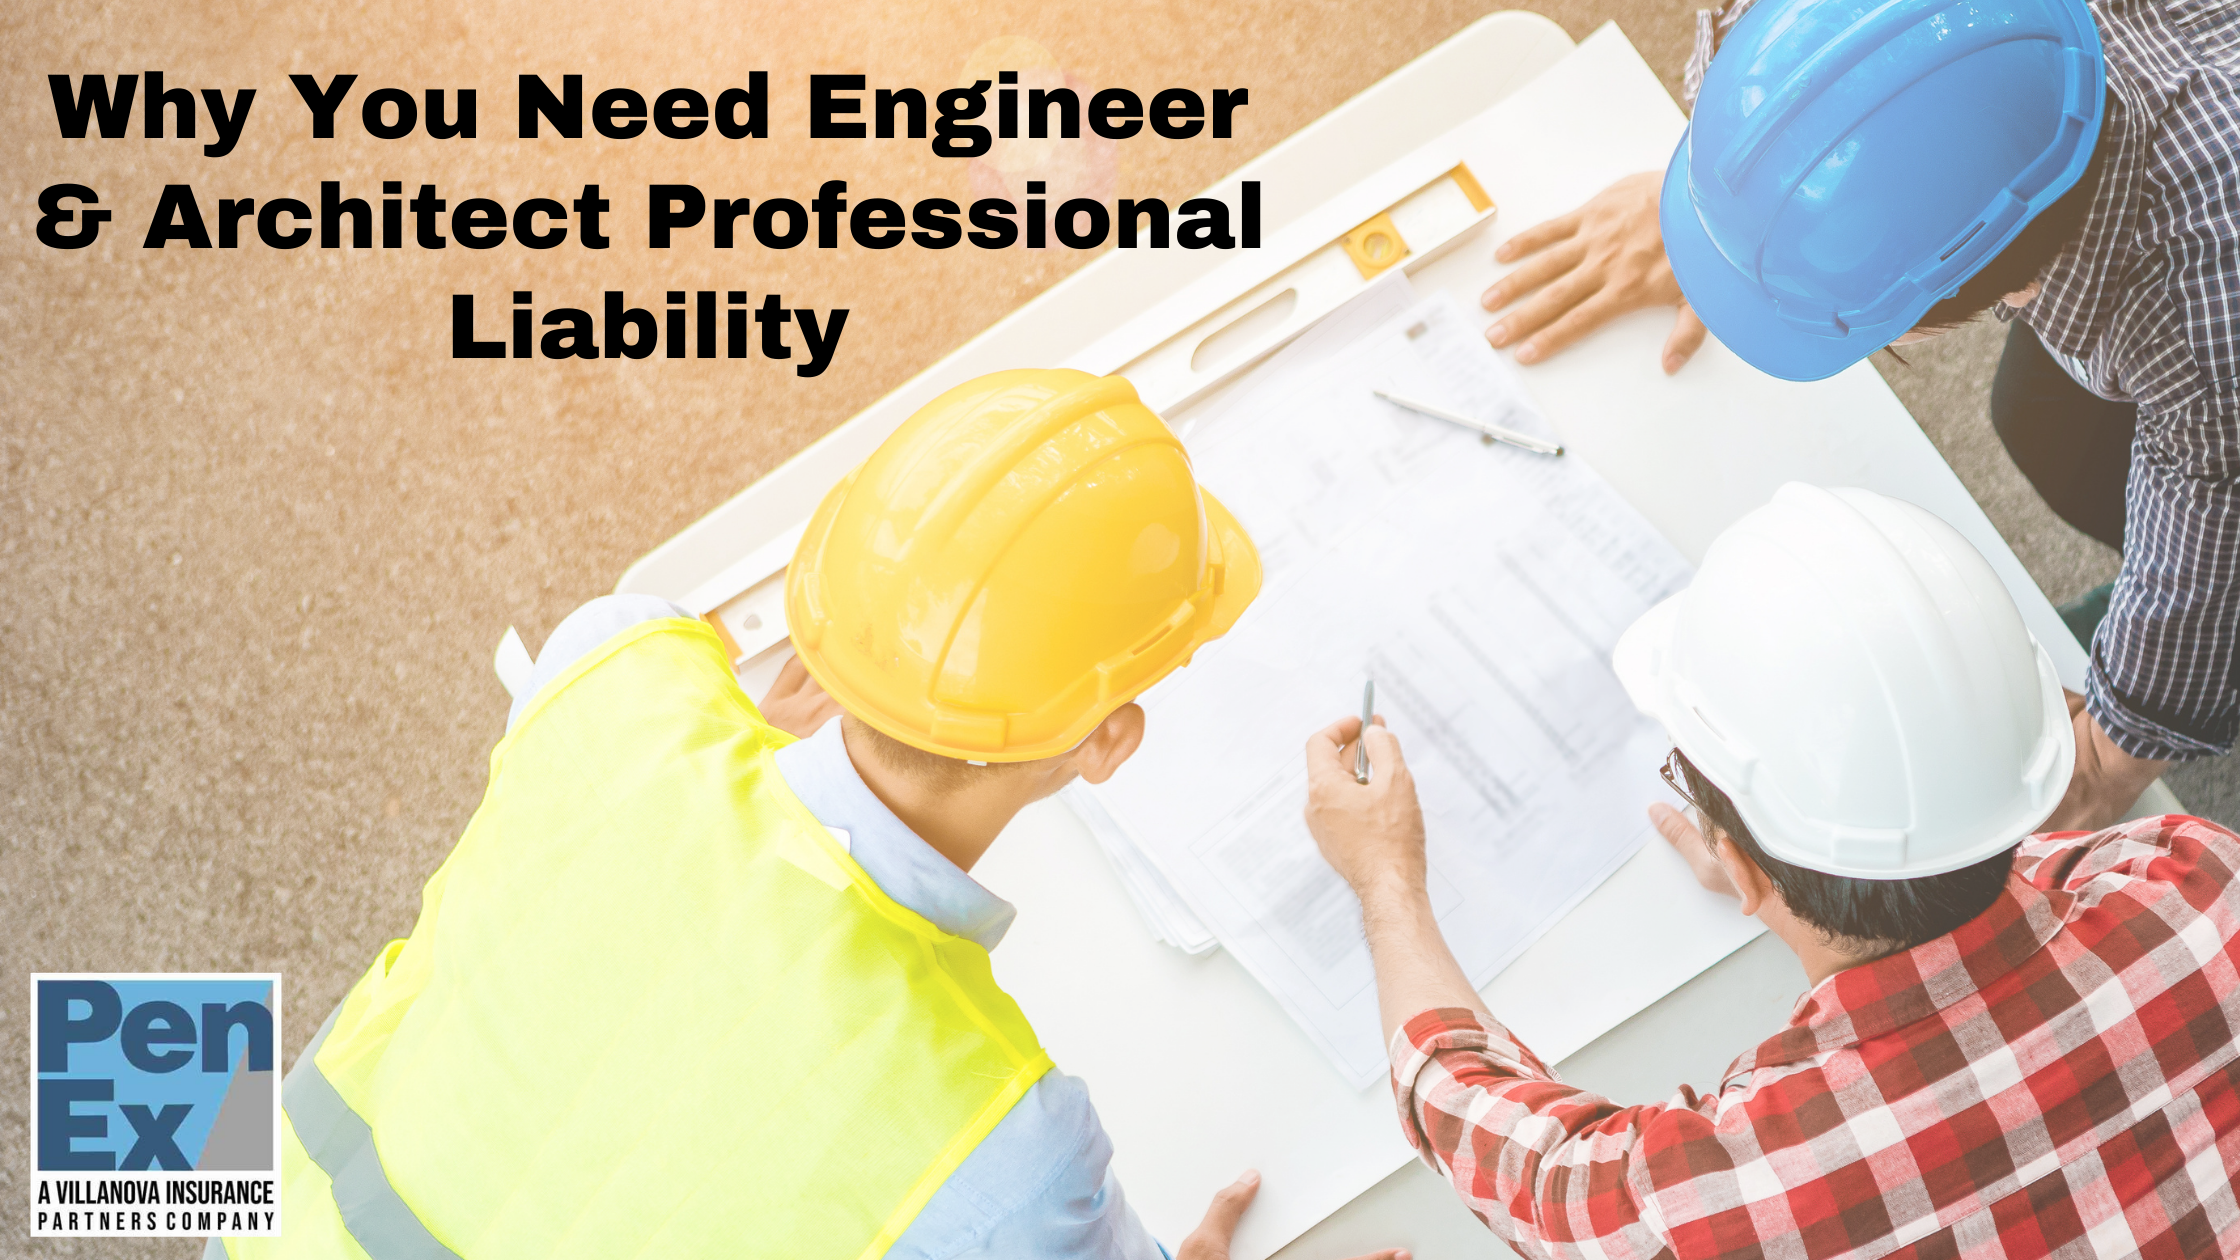 gineer & Architect Professional Liability